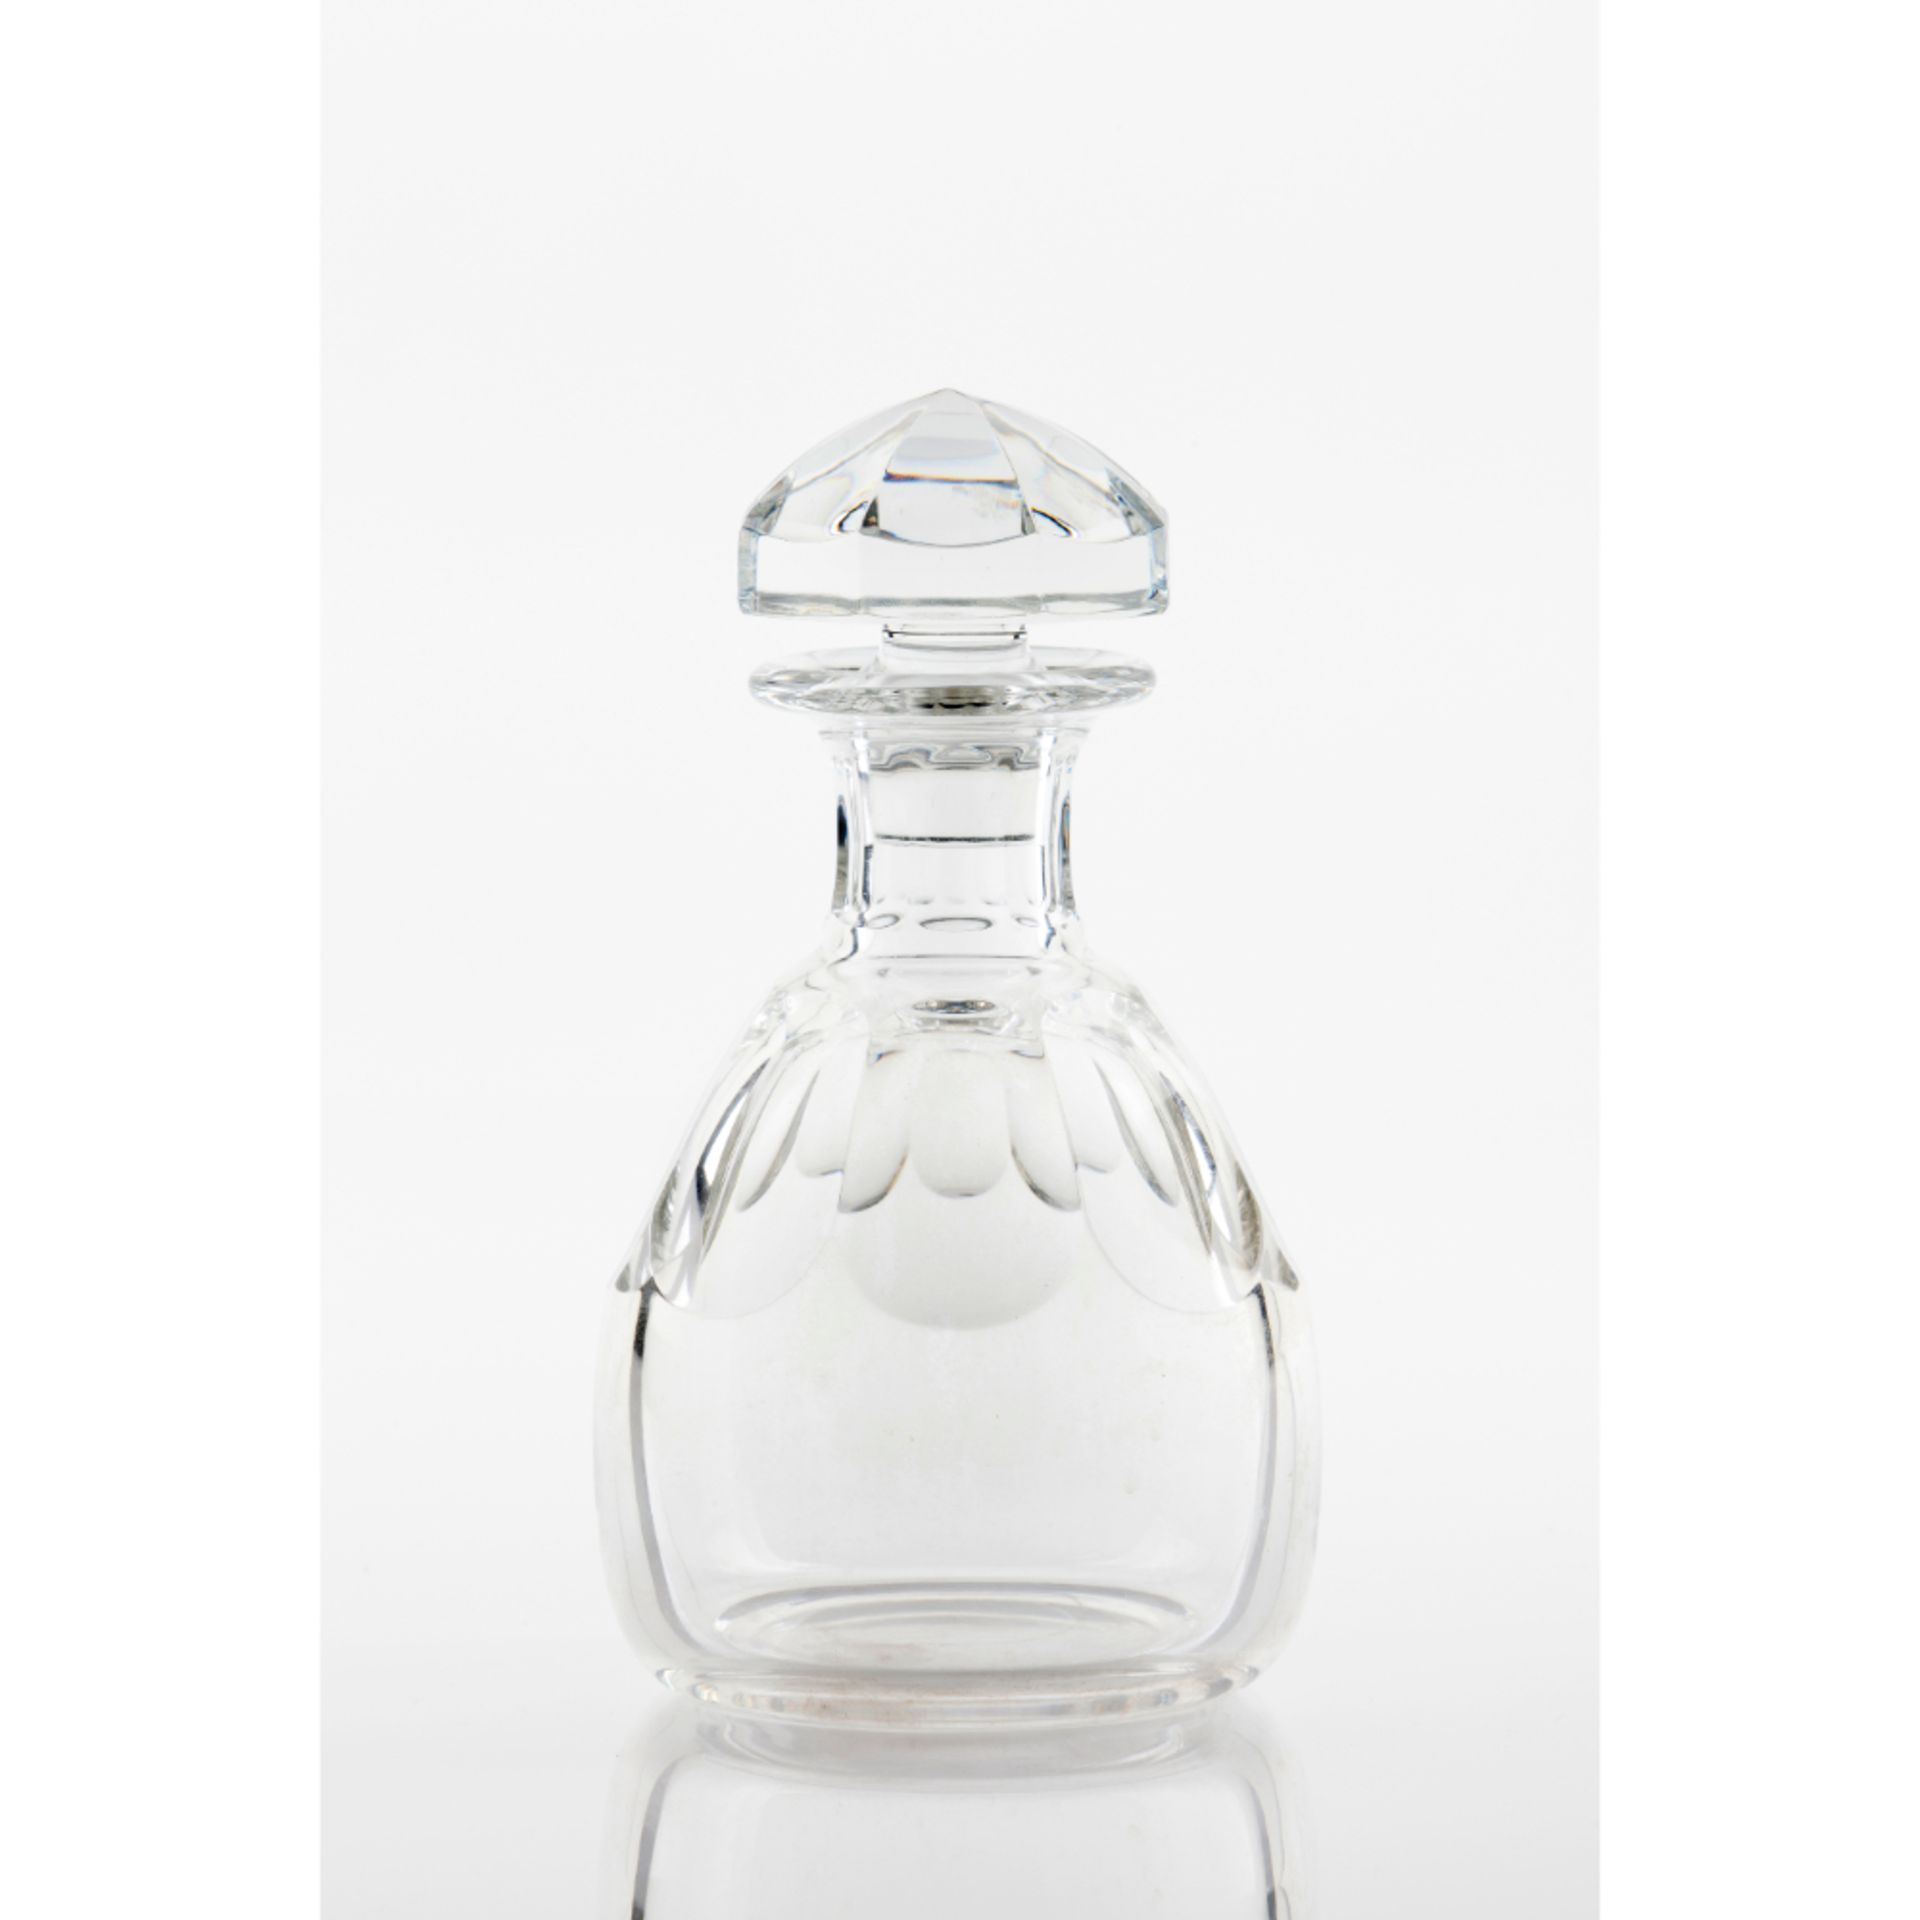 A crystal decanter